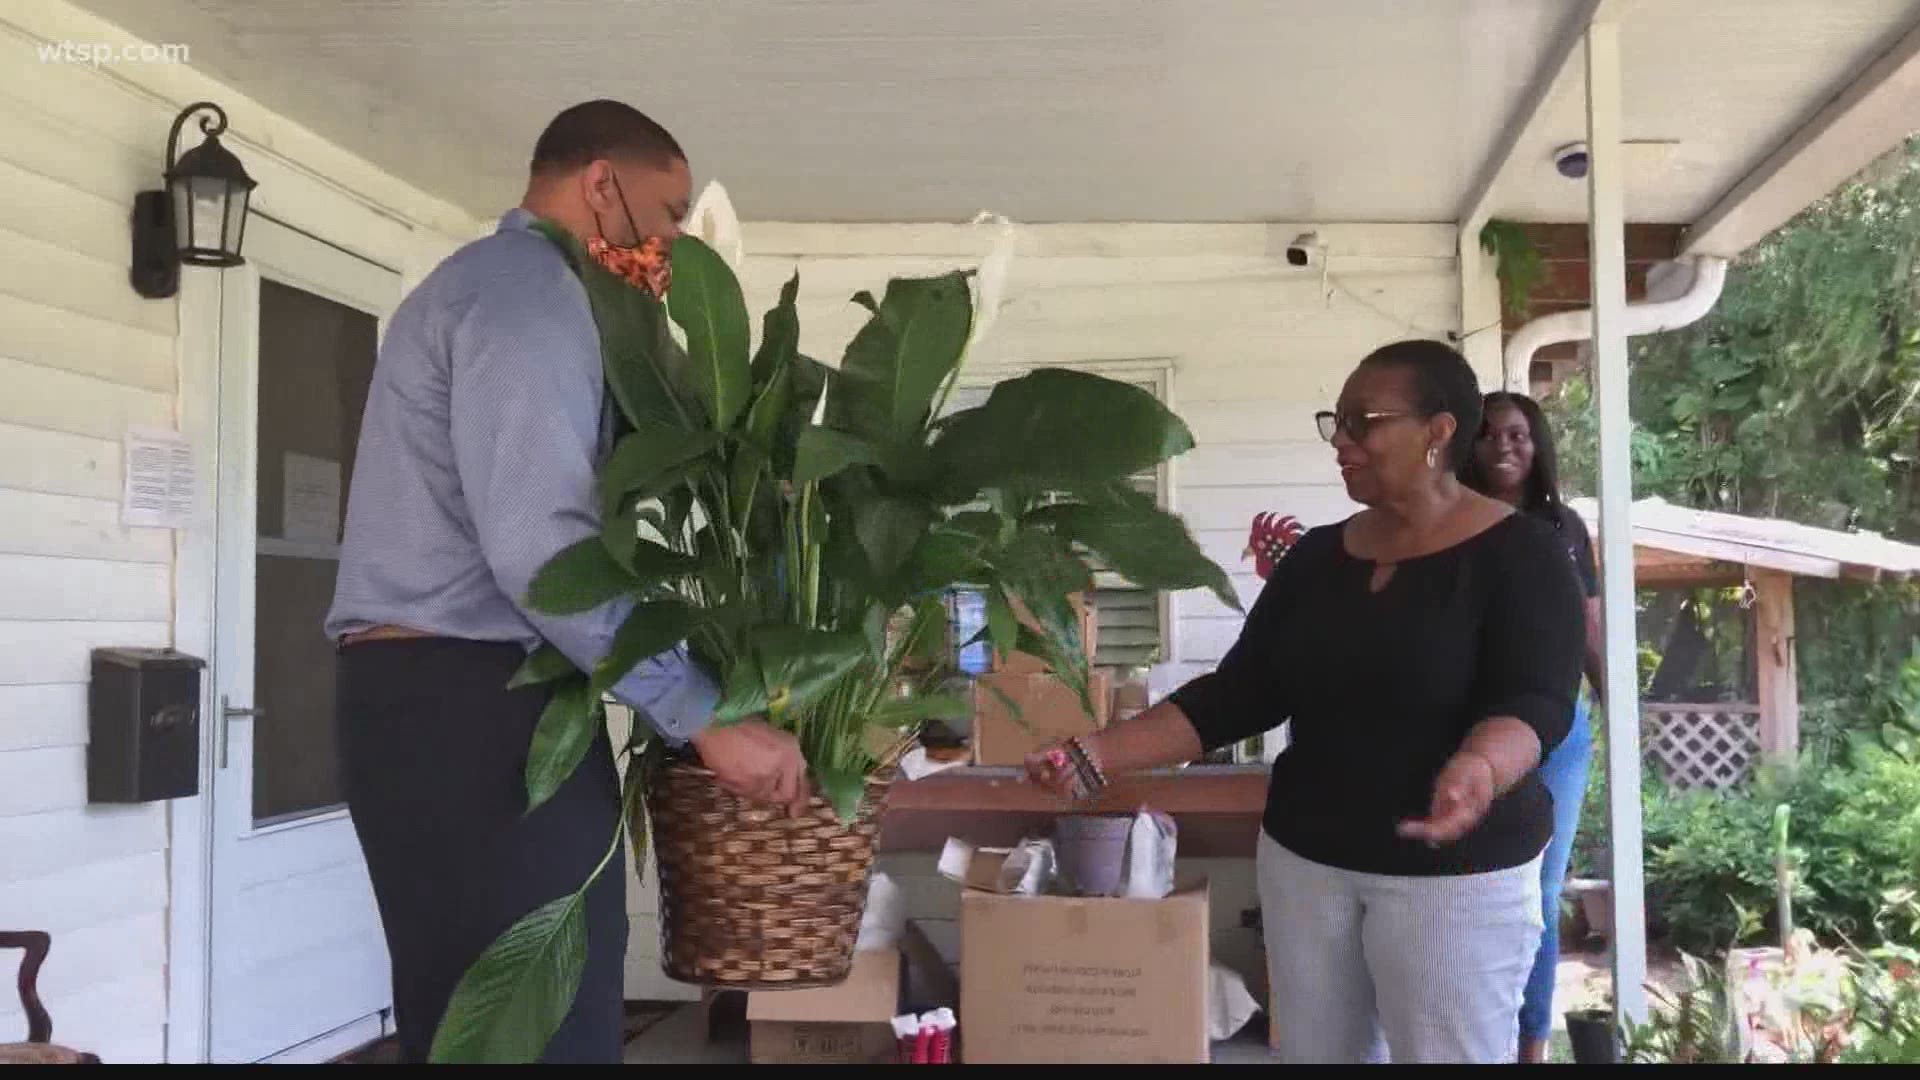 Gary Hartfield delivers items of encouragement to assisted living facilities to honor the loving legacy of his sister.